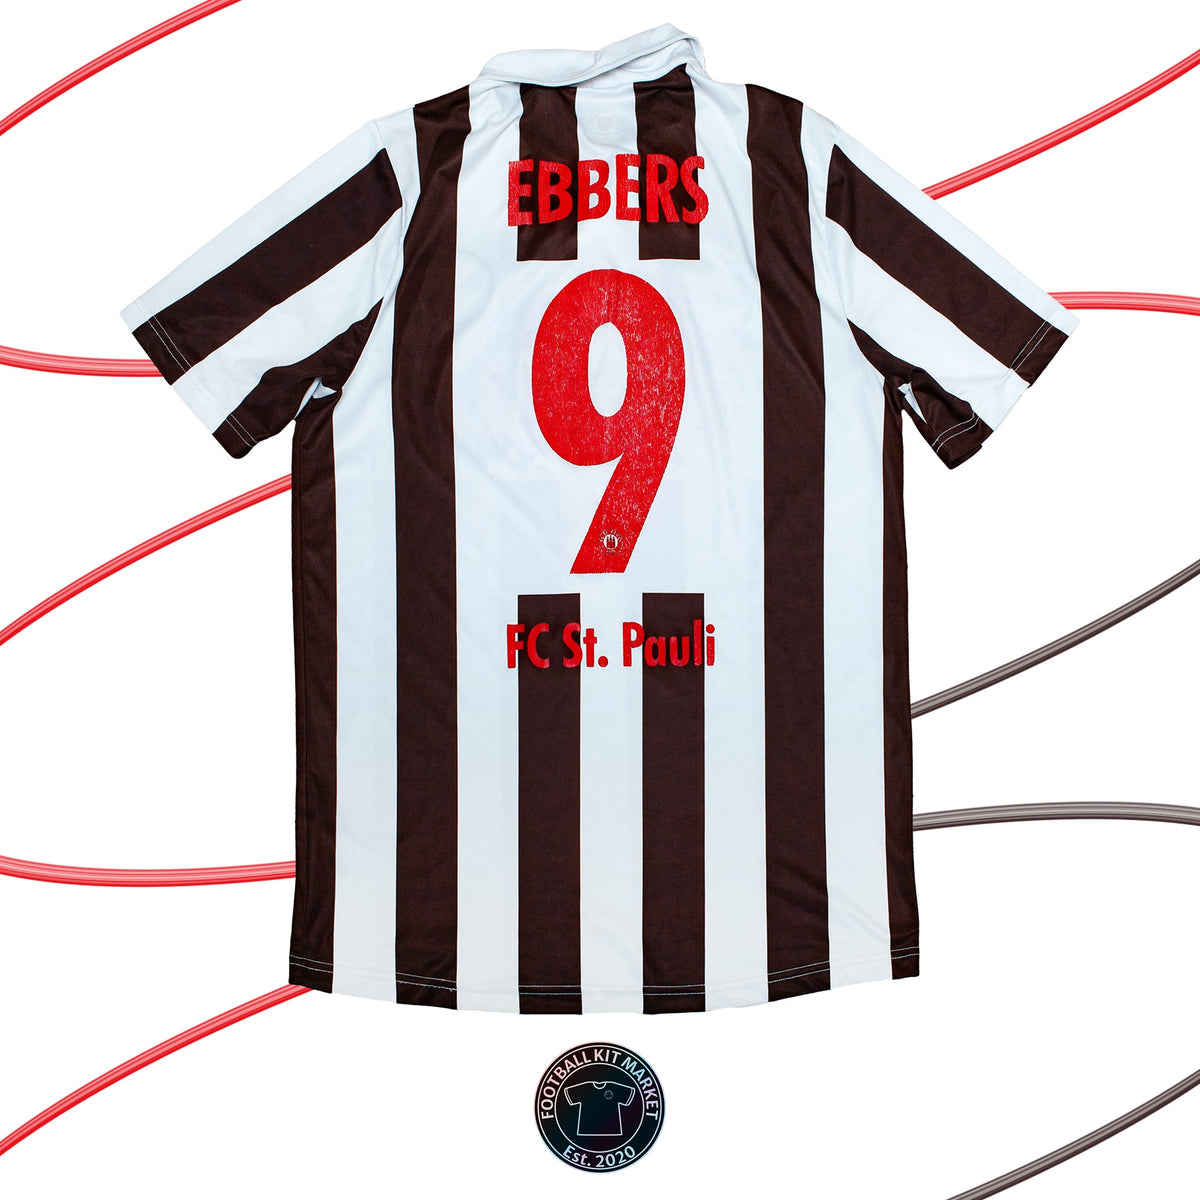 Genuine ST. PAULI Home EBBERS (2011-2012) - DO YOU FOOTBALL (XL) - Product Image from Football Kit Market